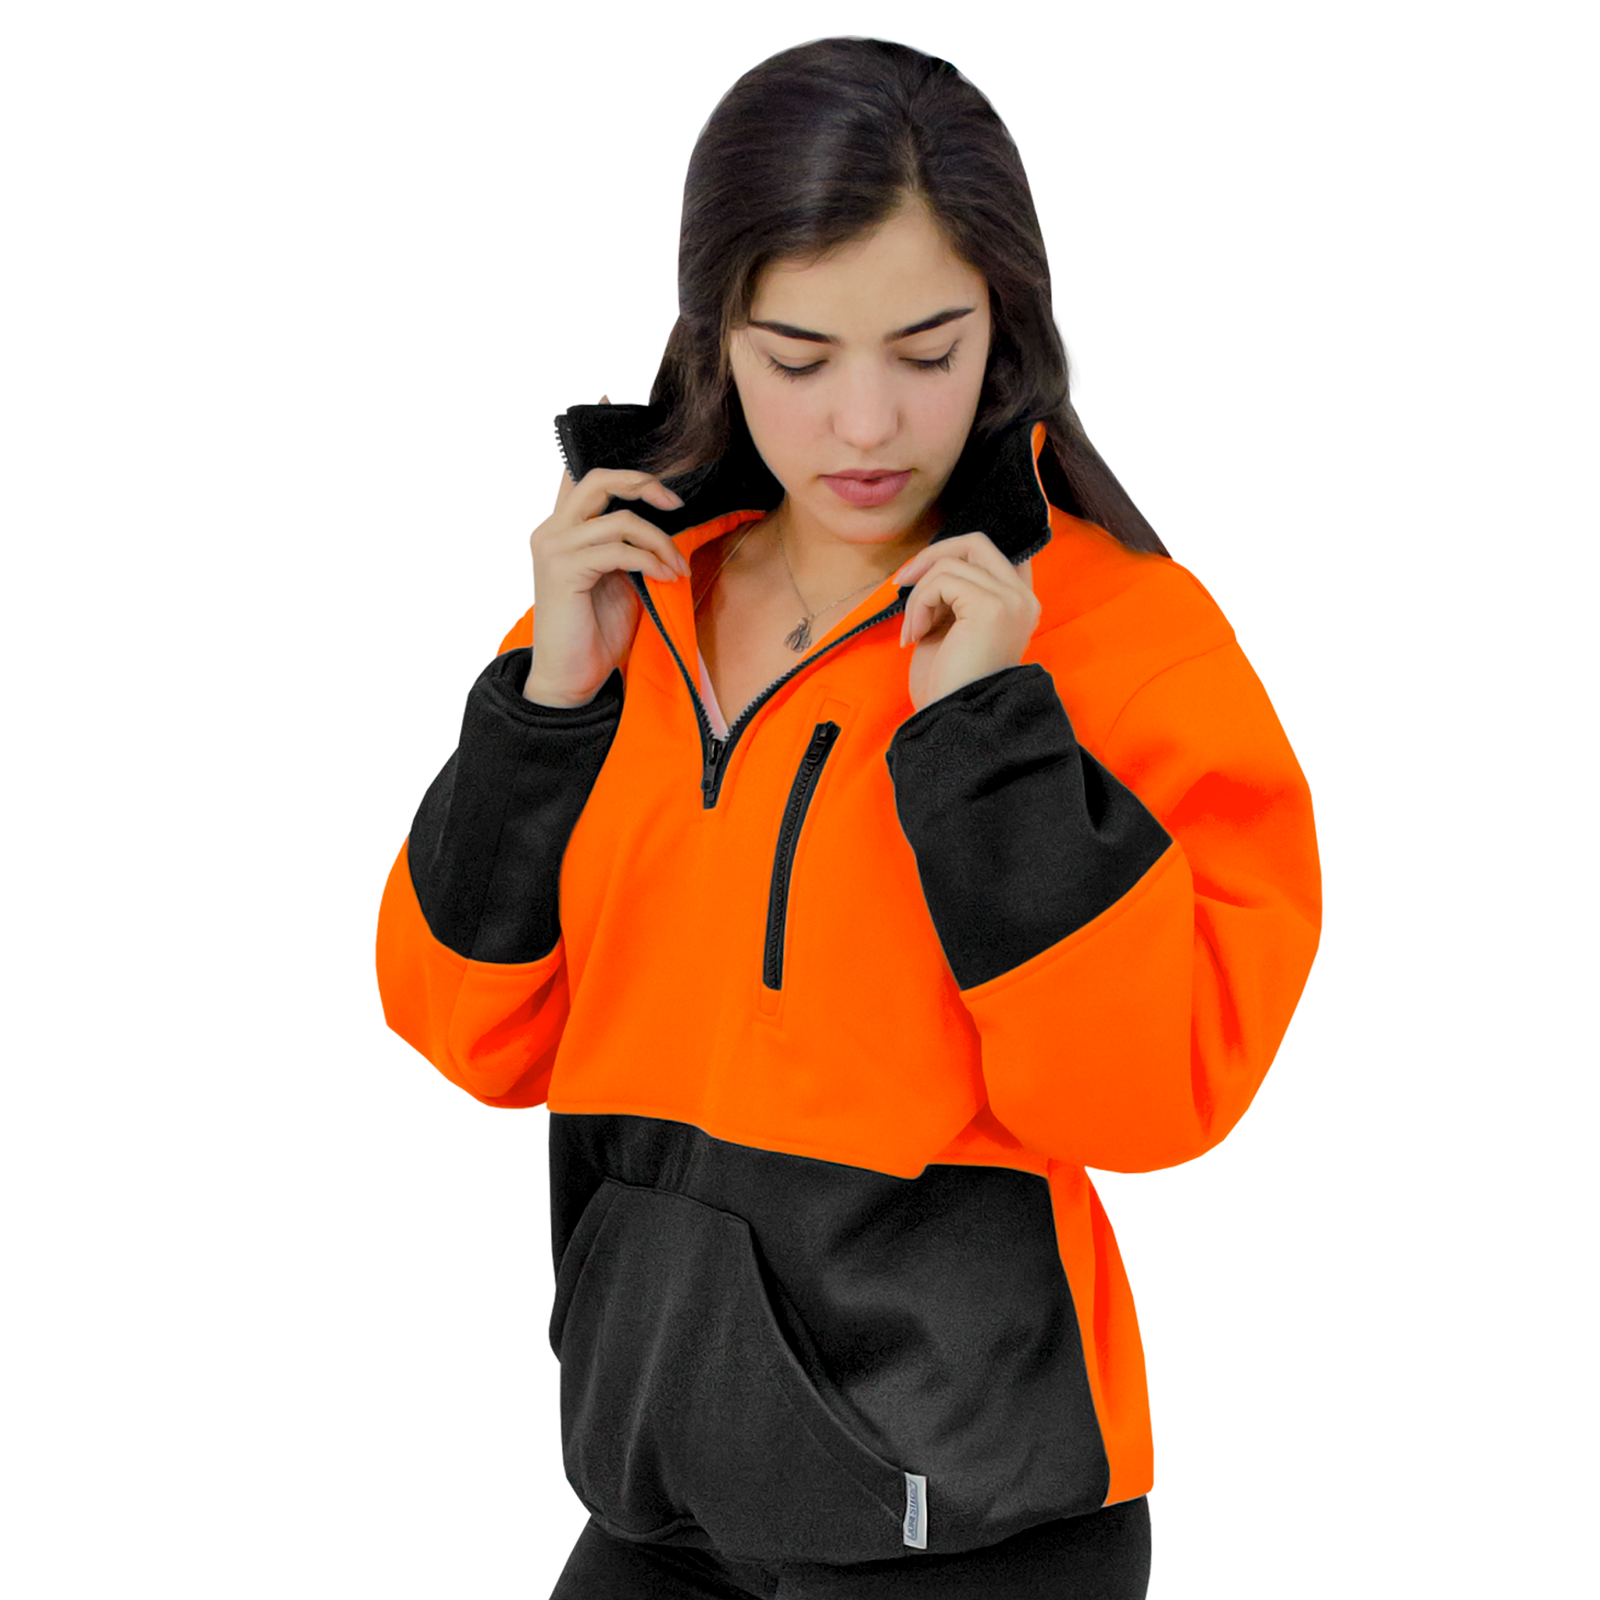 A woman wearing the orange hi-vis safety sweater while holding the fleece collar